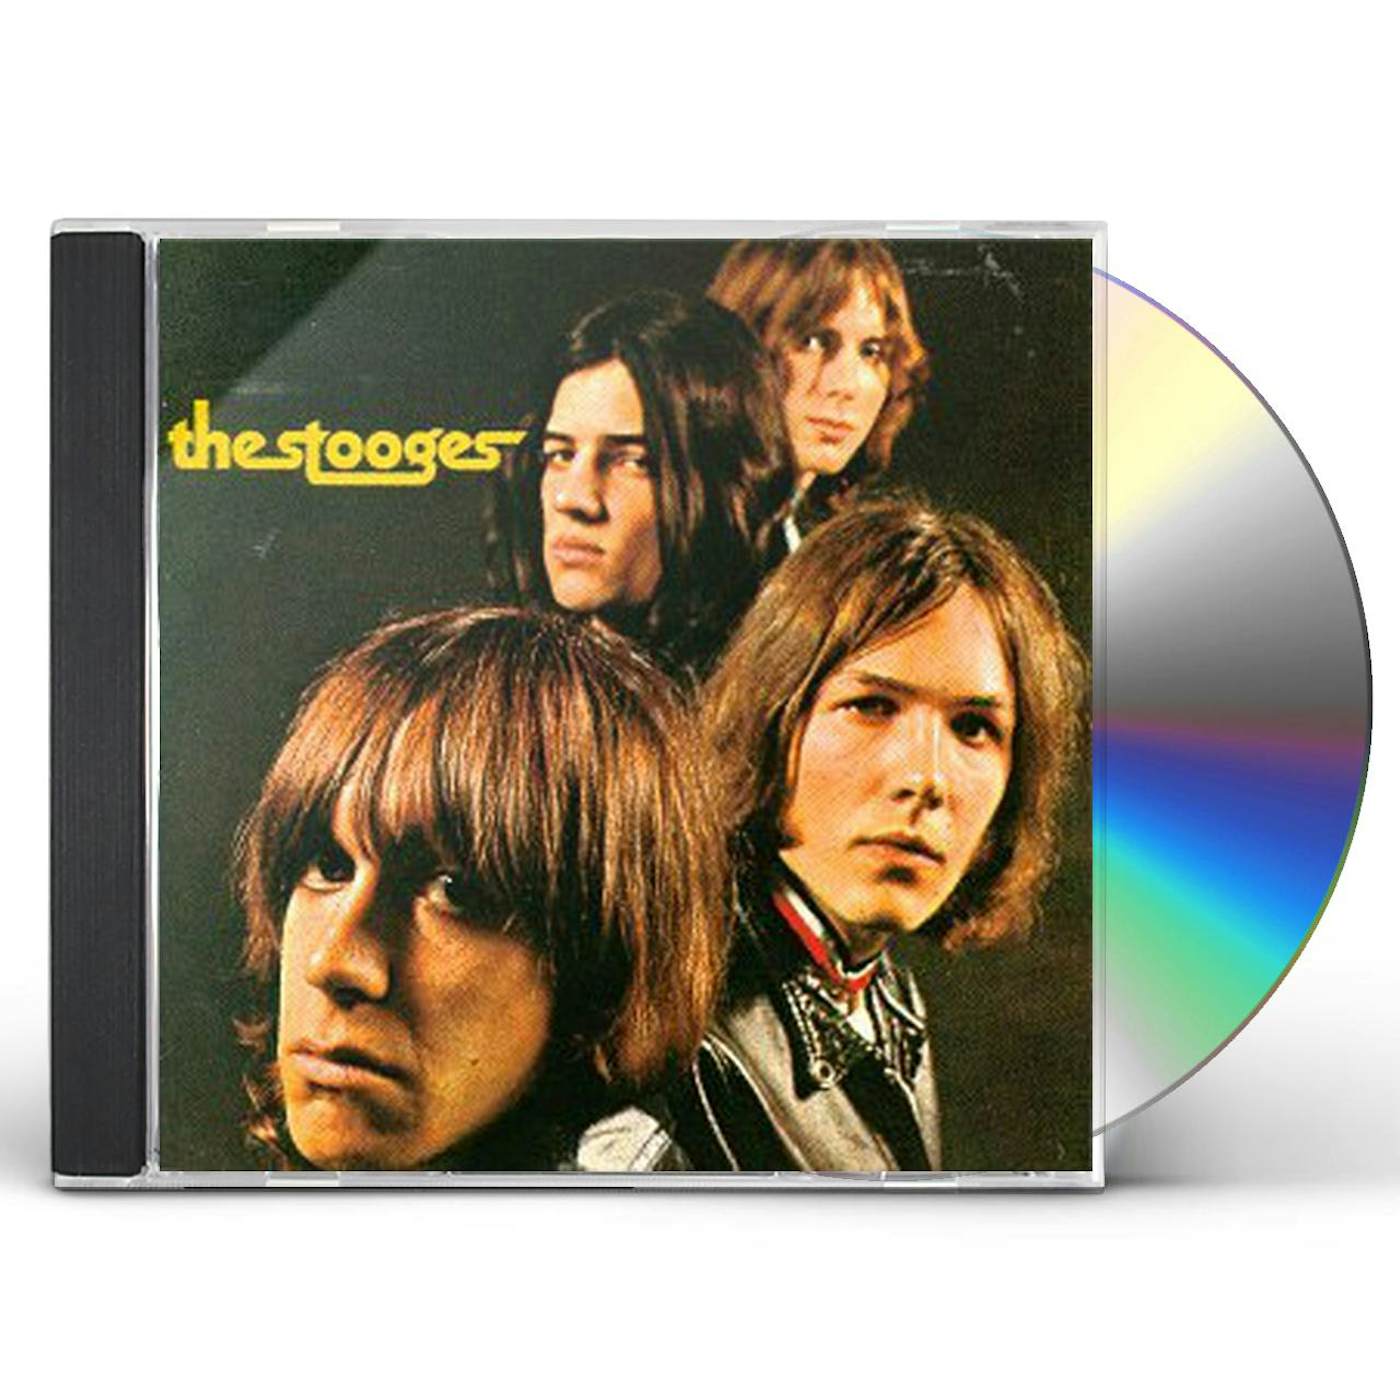 The Stooges CD